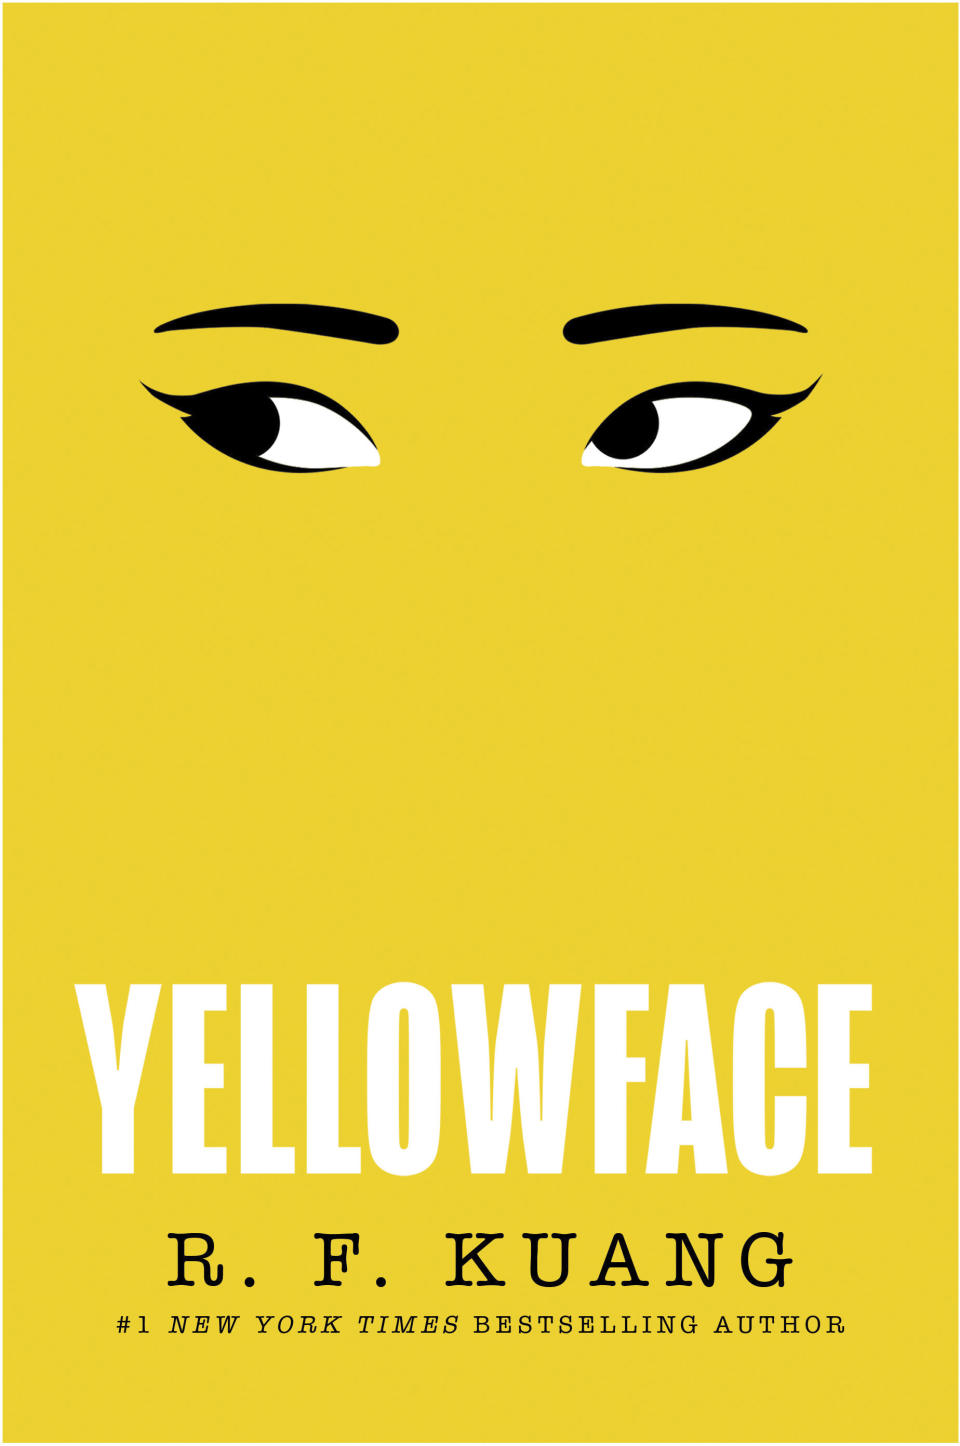 This cover image released by William Morrow shows "Yellowface" by R. F. Kuang. (William Morrow via AP)